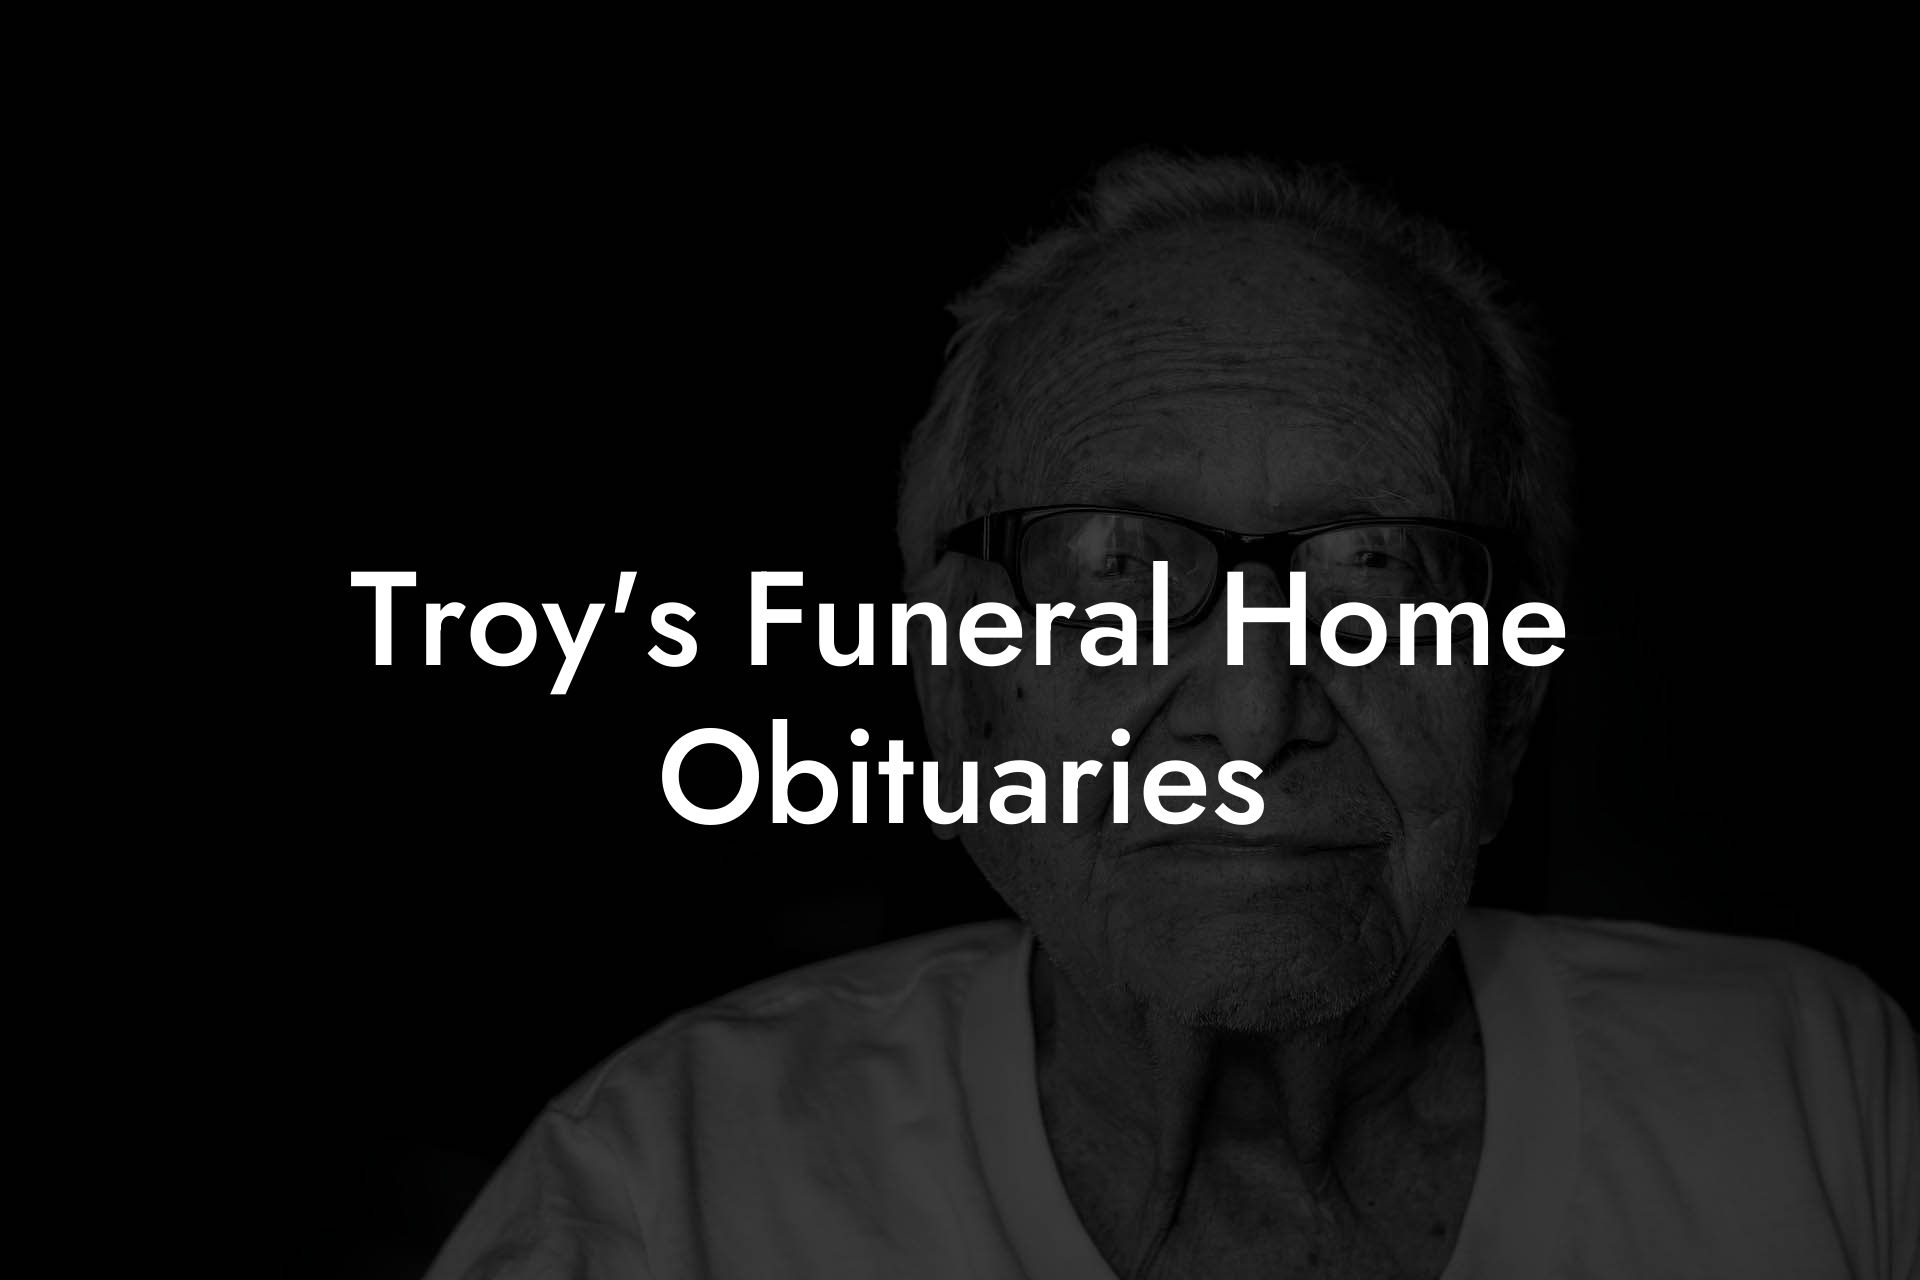 Troy's Funeral Home Obituaries